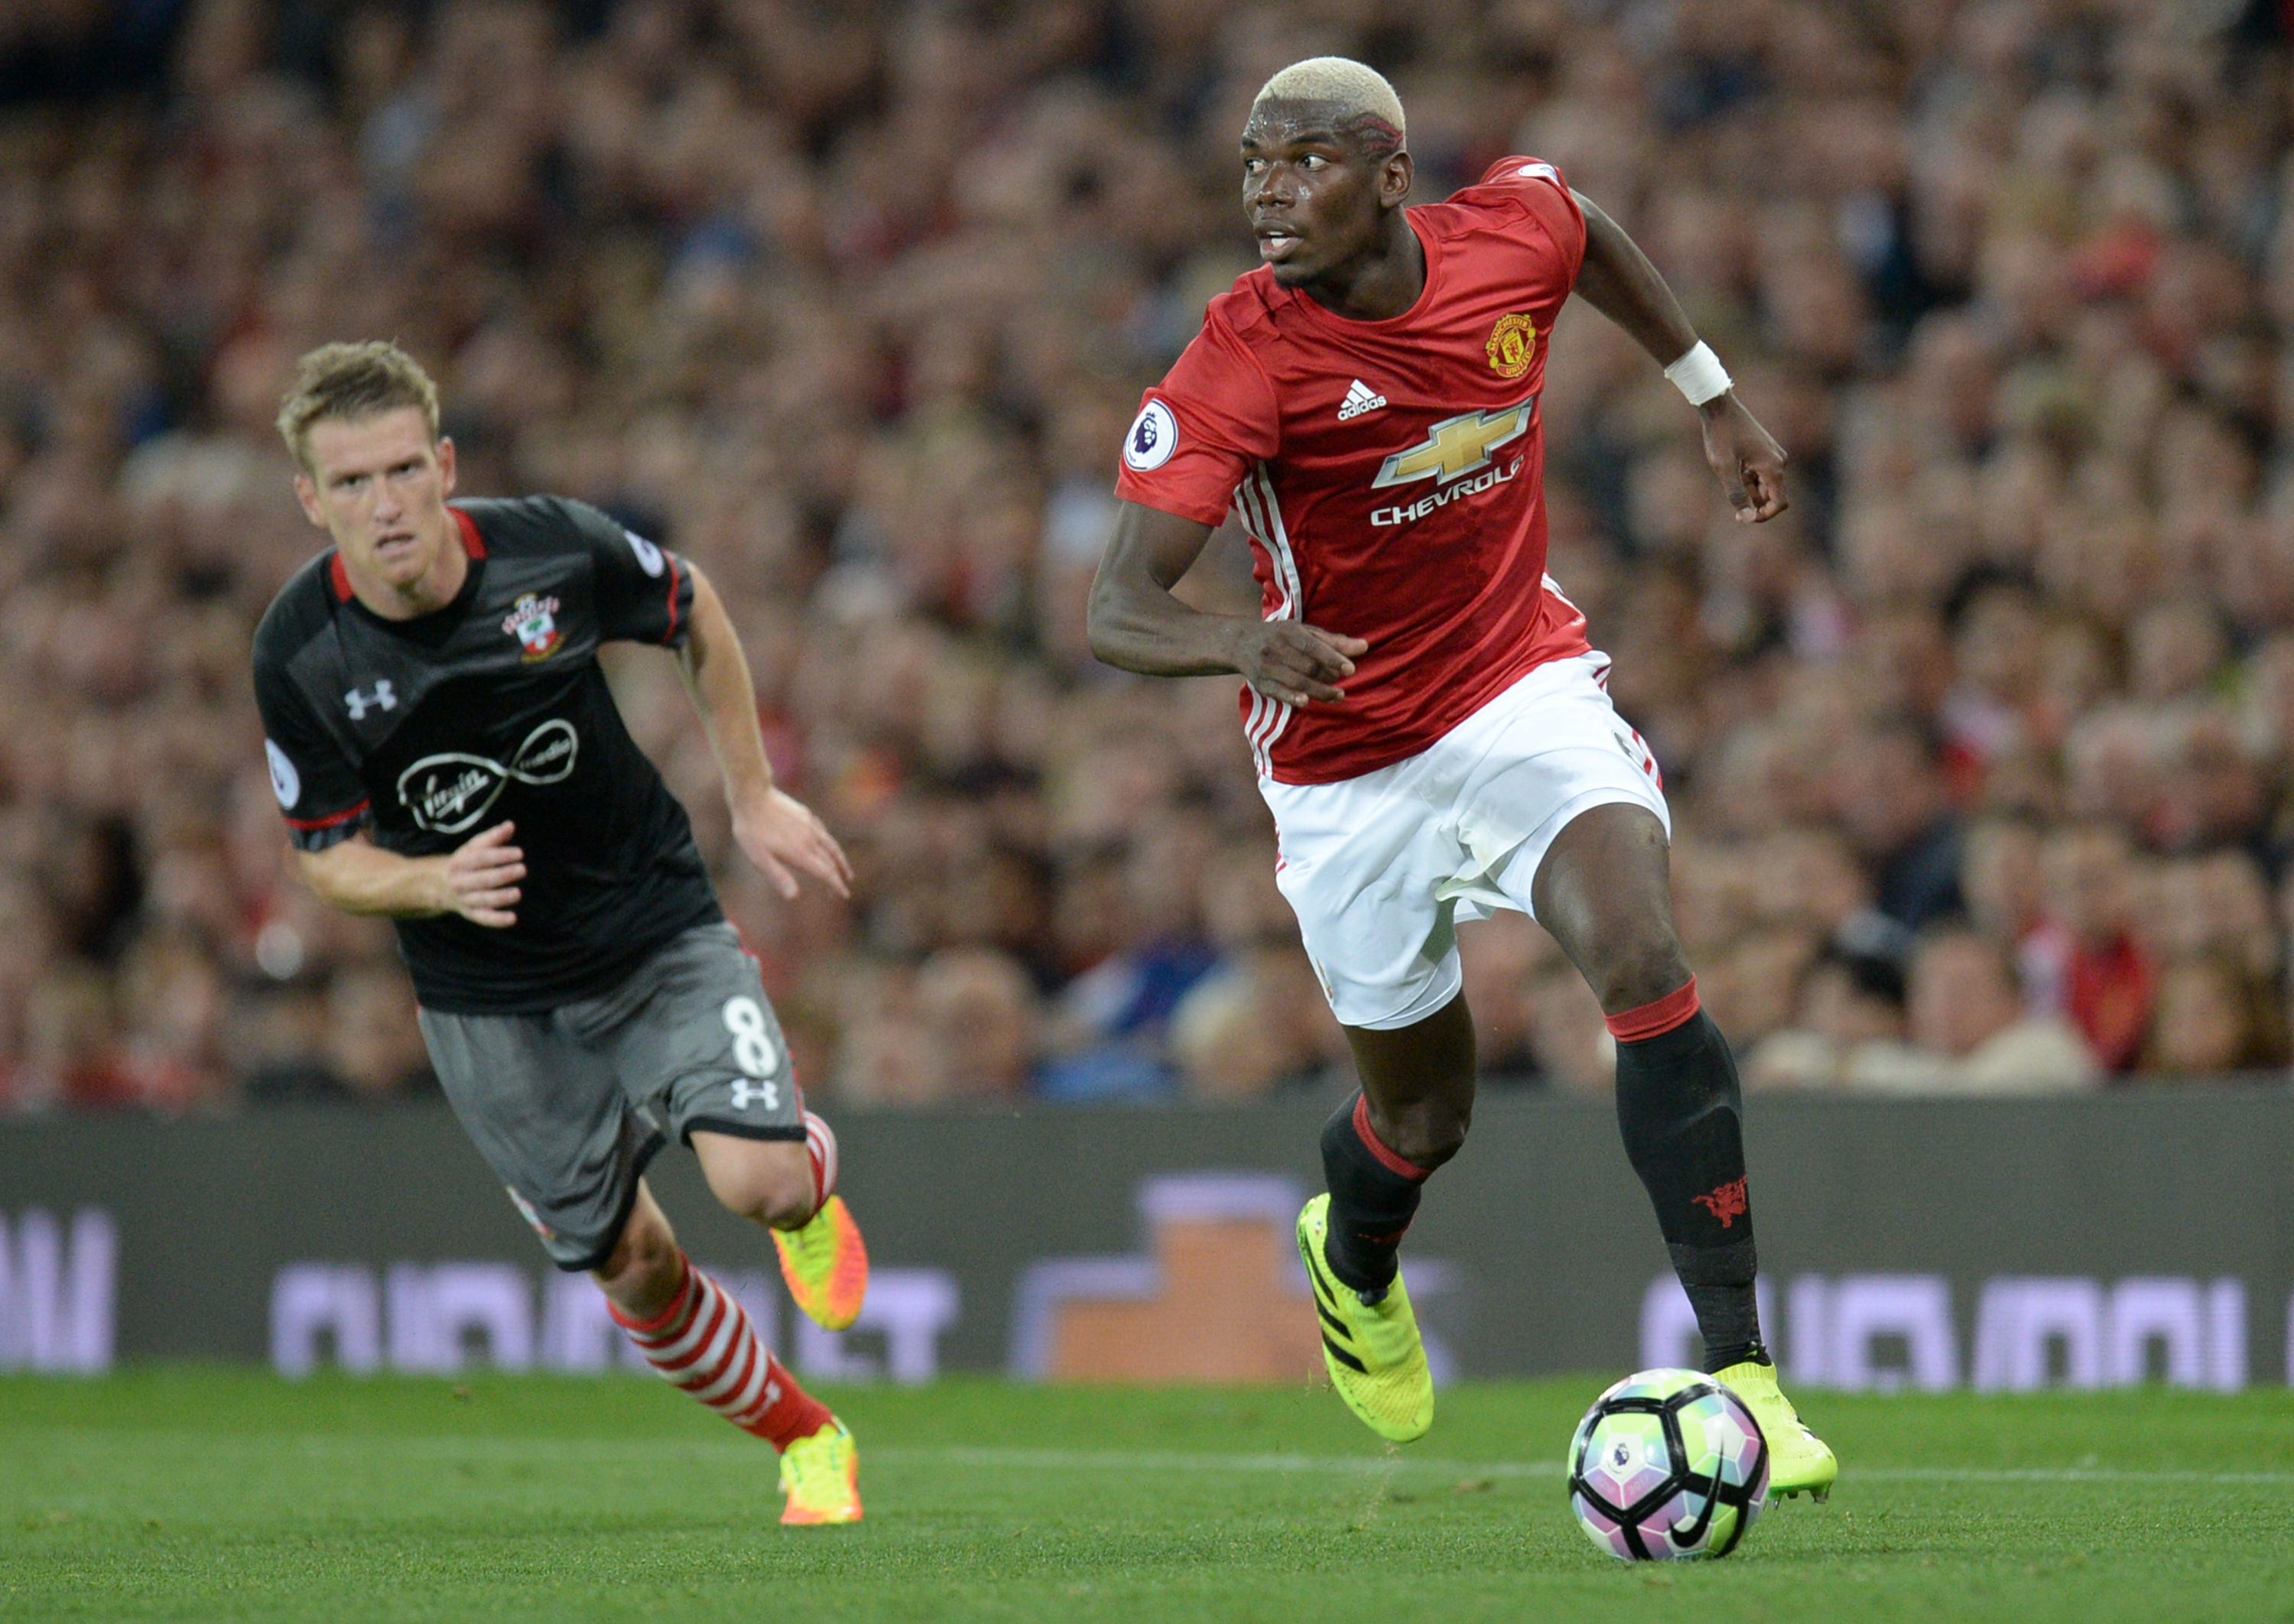 Manchester United's French midfielder Paul Pogba (R) runs with the ball during the English Premier League football match between Manchester United and Southampton at Old Trafford in Manchester, north west England, on August 19, 2016. / AFP / Oli SCARFF / RESTRICTED TO EDITORIAL USE. No use with unauthorized audio, video, data, fixture lists, club/league logos or 'live' services. Online in-match use limited to 75 images, no video emulation. No use in betting, games or single club/league/player publications.  /         (Photo credit should read OLI SCARFF/AFP/Getty Images)